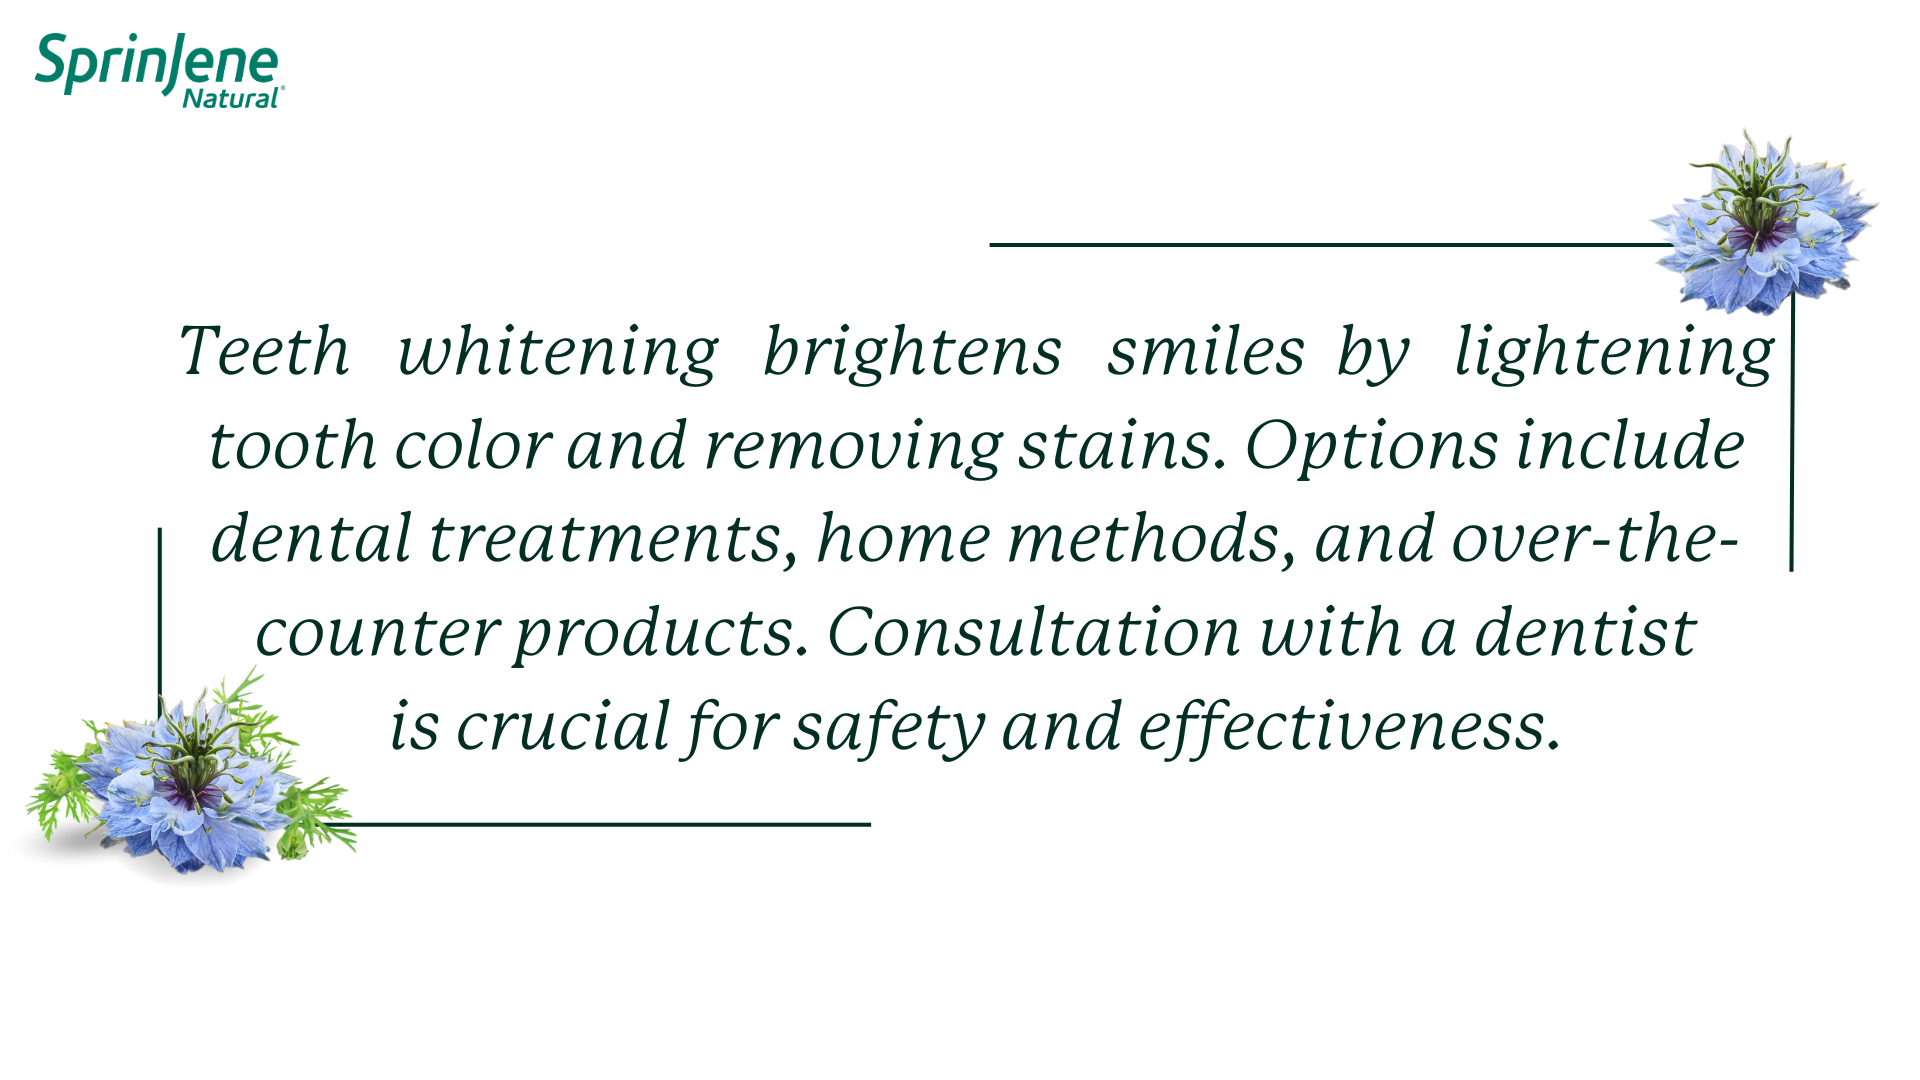 Teeth   whitening   brightens   smiles  by   lightening tooth color and removing stains. Options include dental treatments, home methods, and over-the-counter products. Consultation with a dentist is crucial for safety and effectiveness.